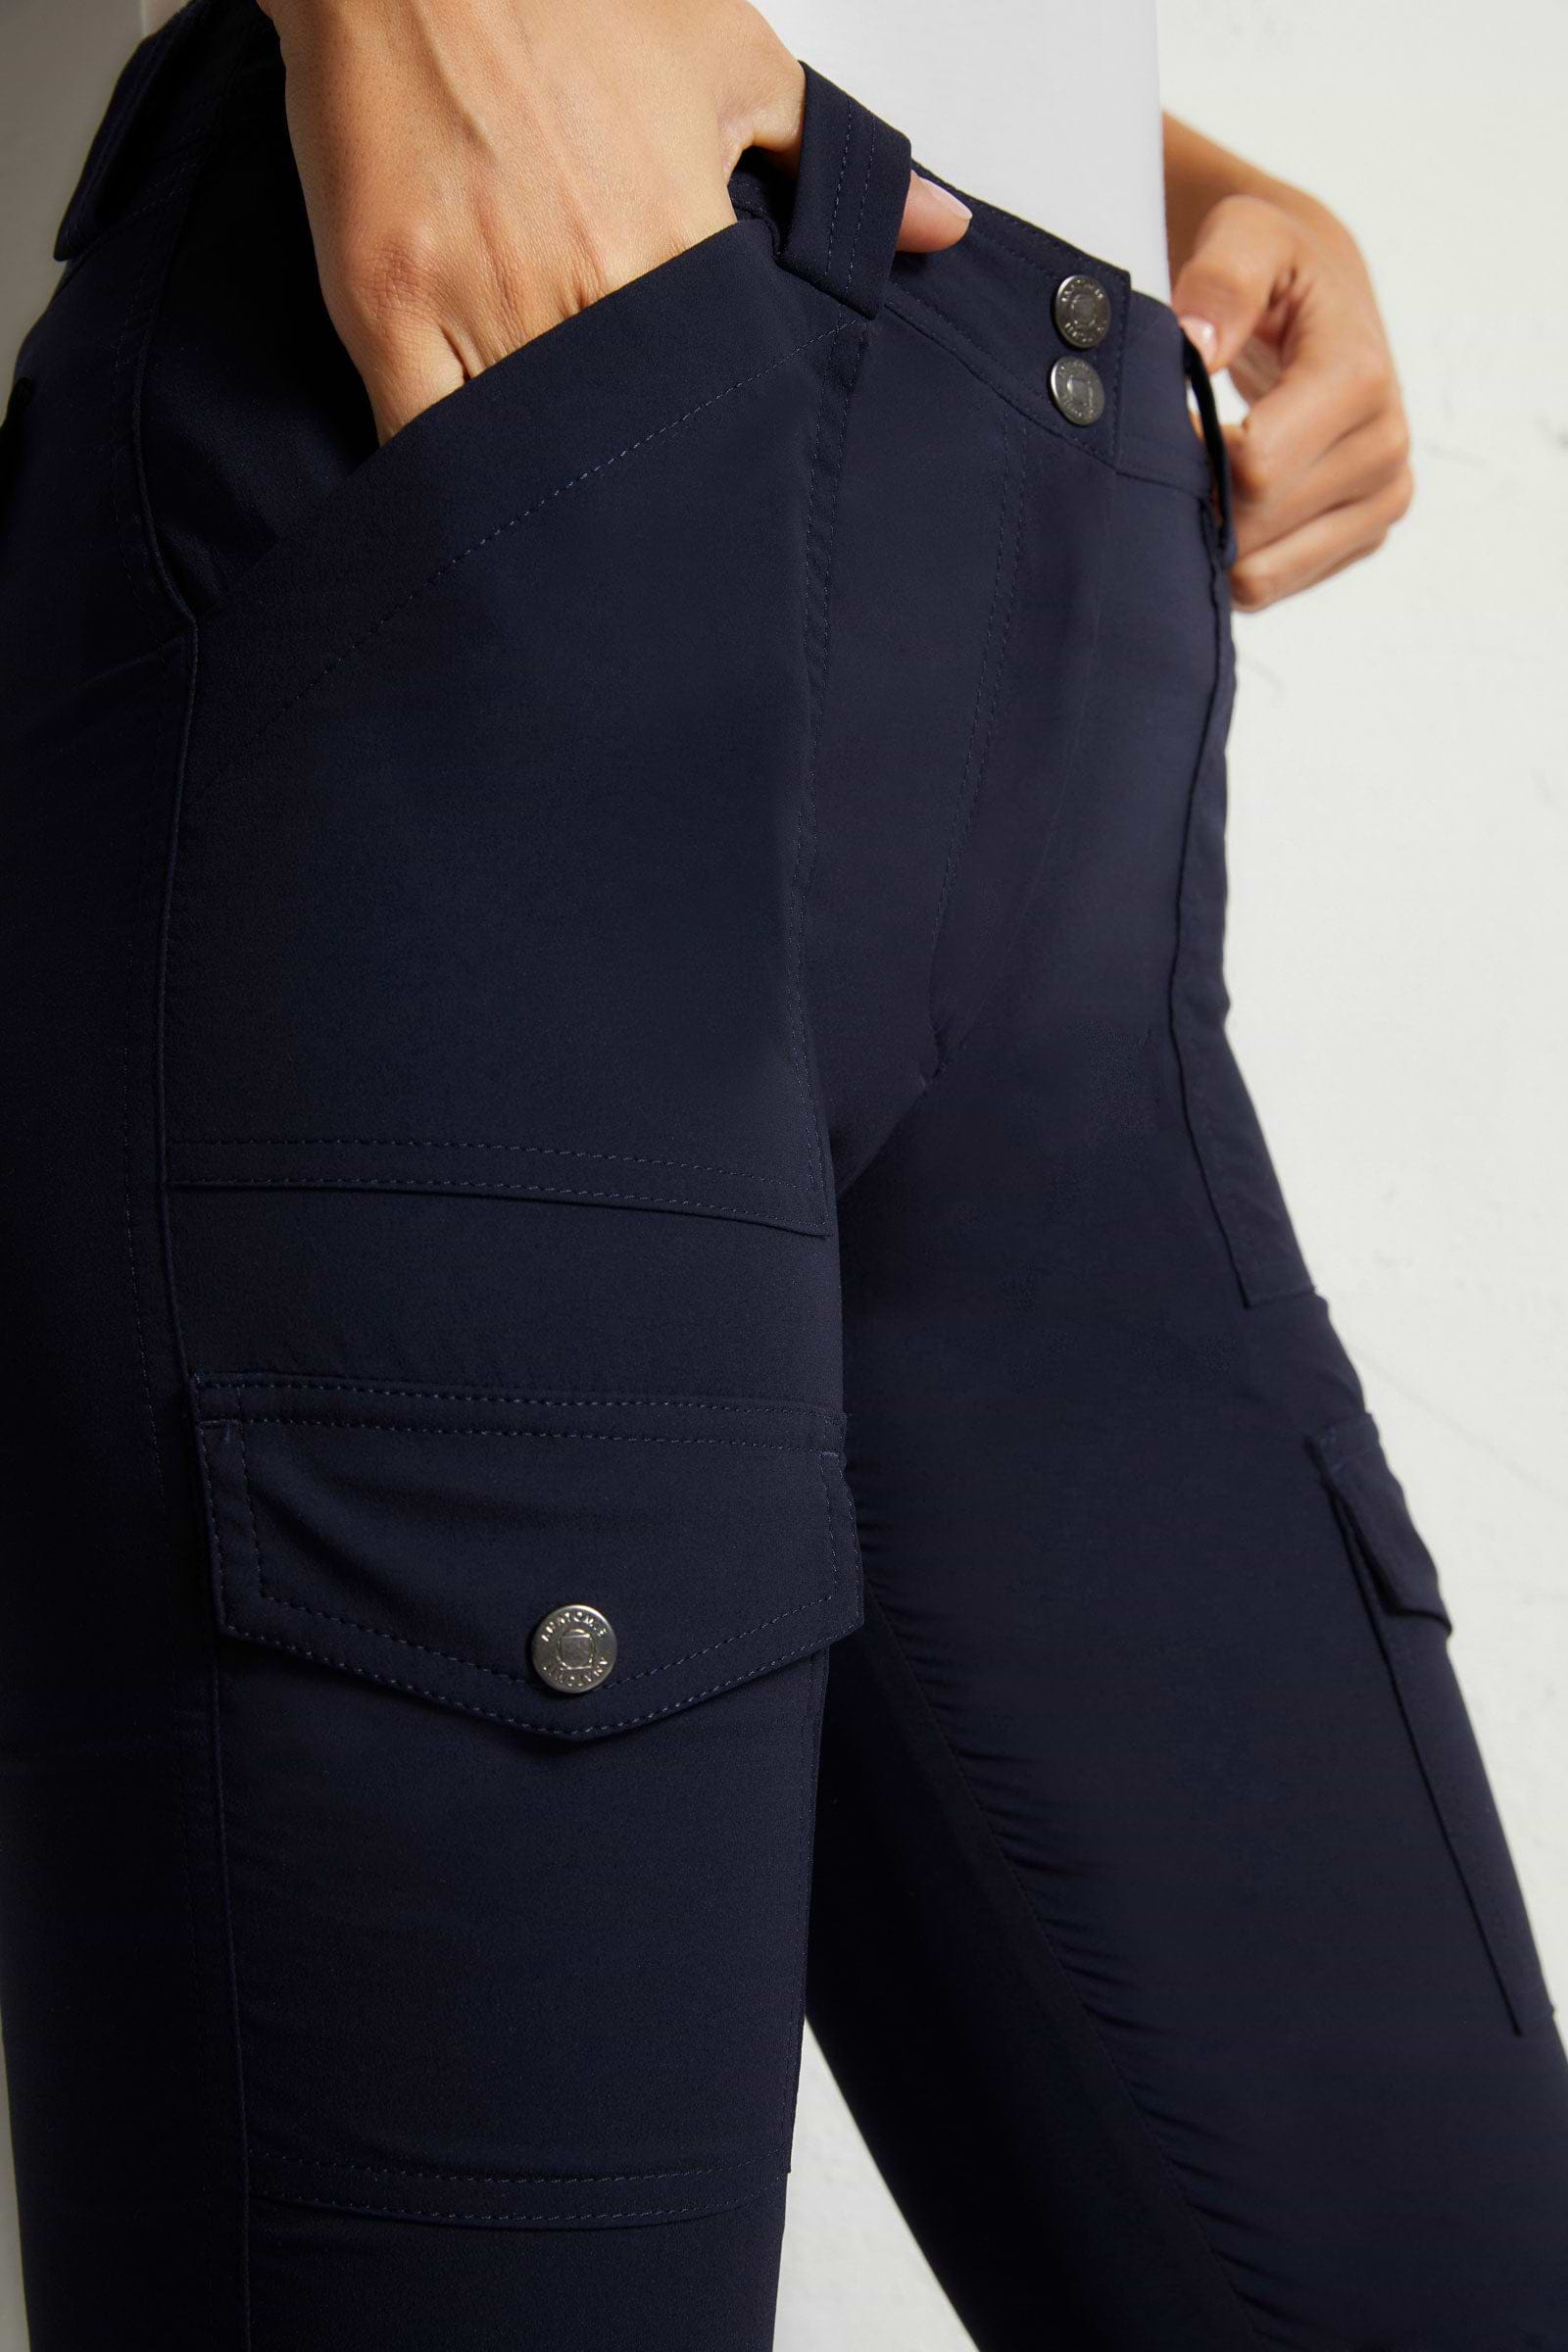 The Best Travel Cargo Pants. Front Pocket on Skinny Cargo Pant in Navy